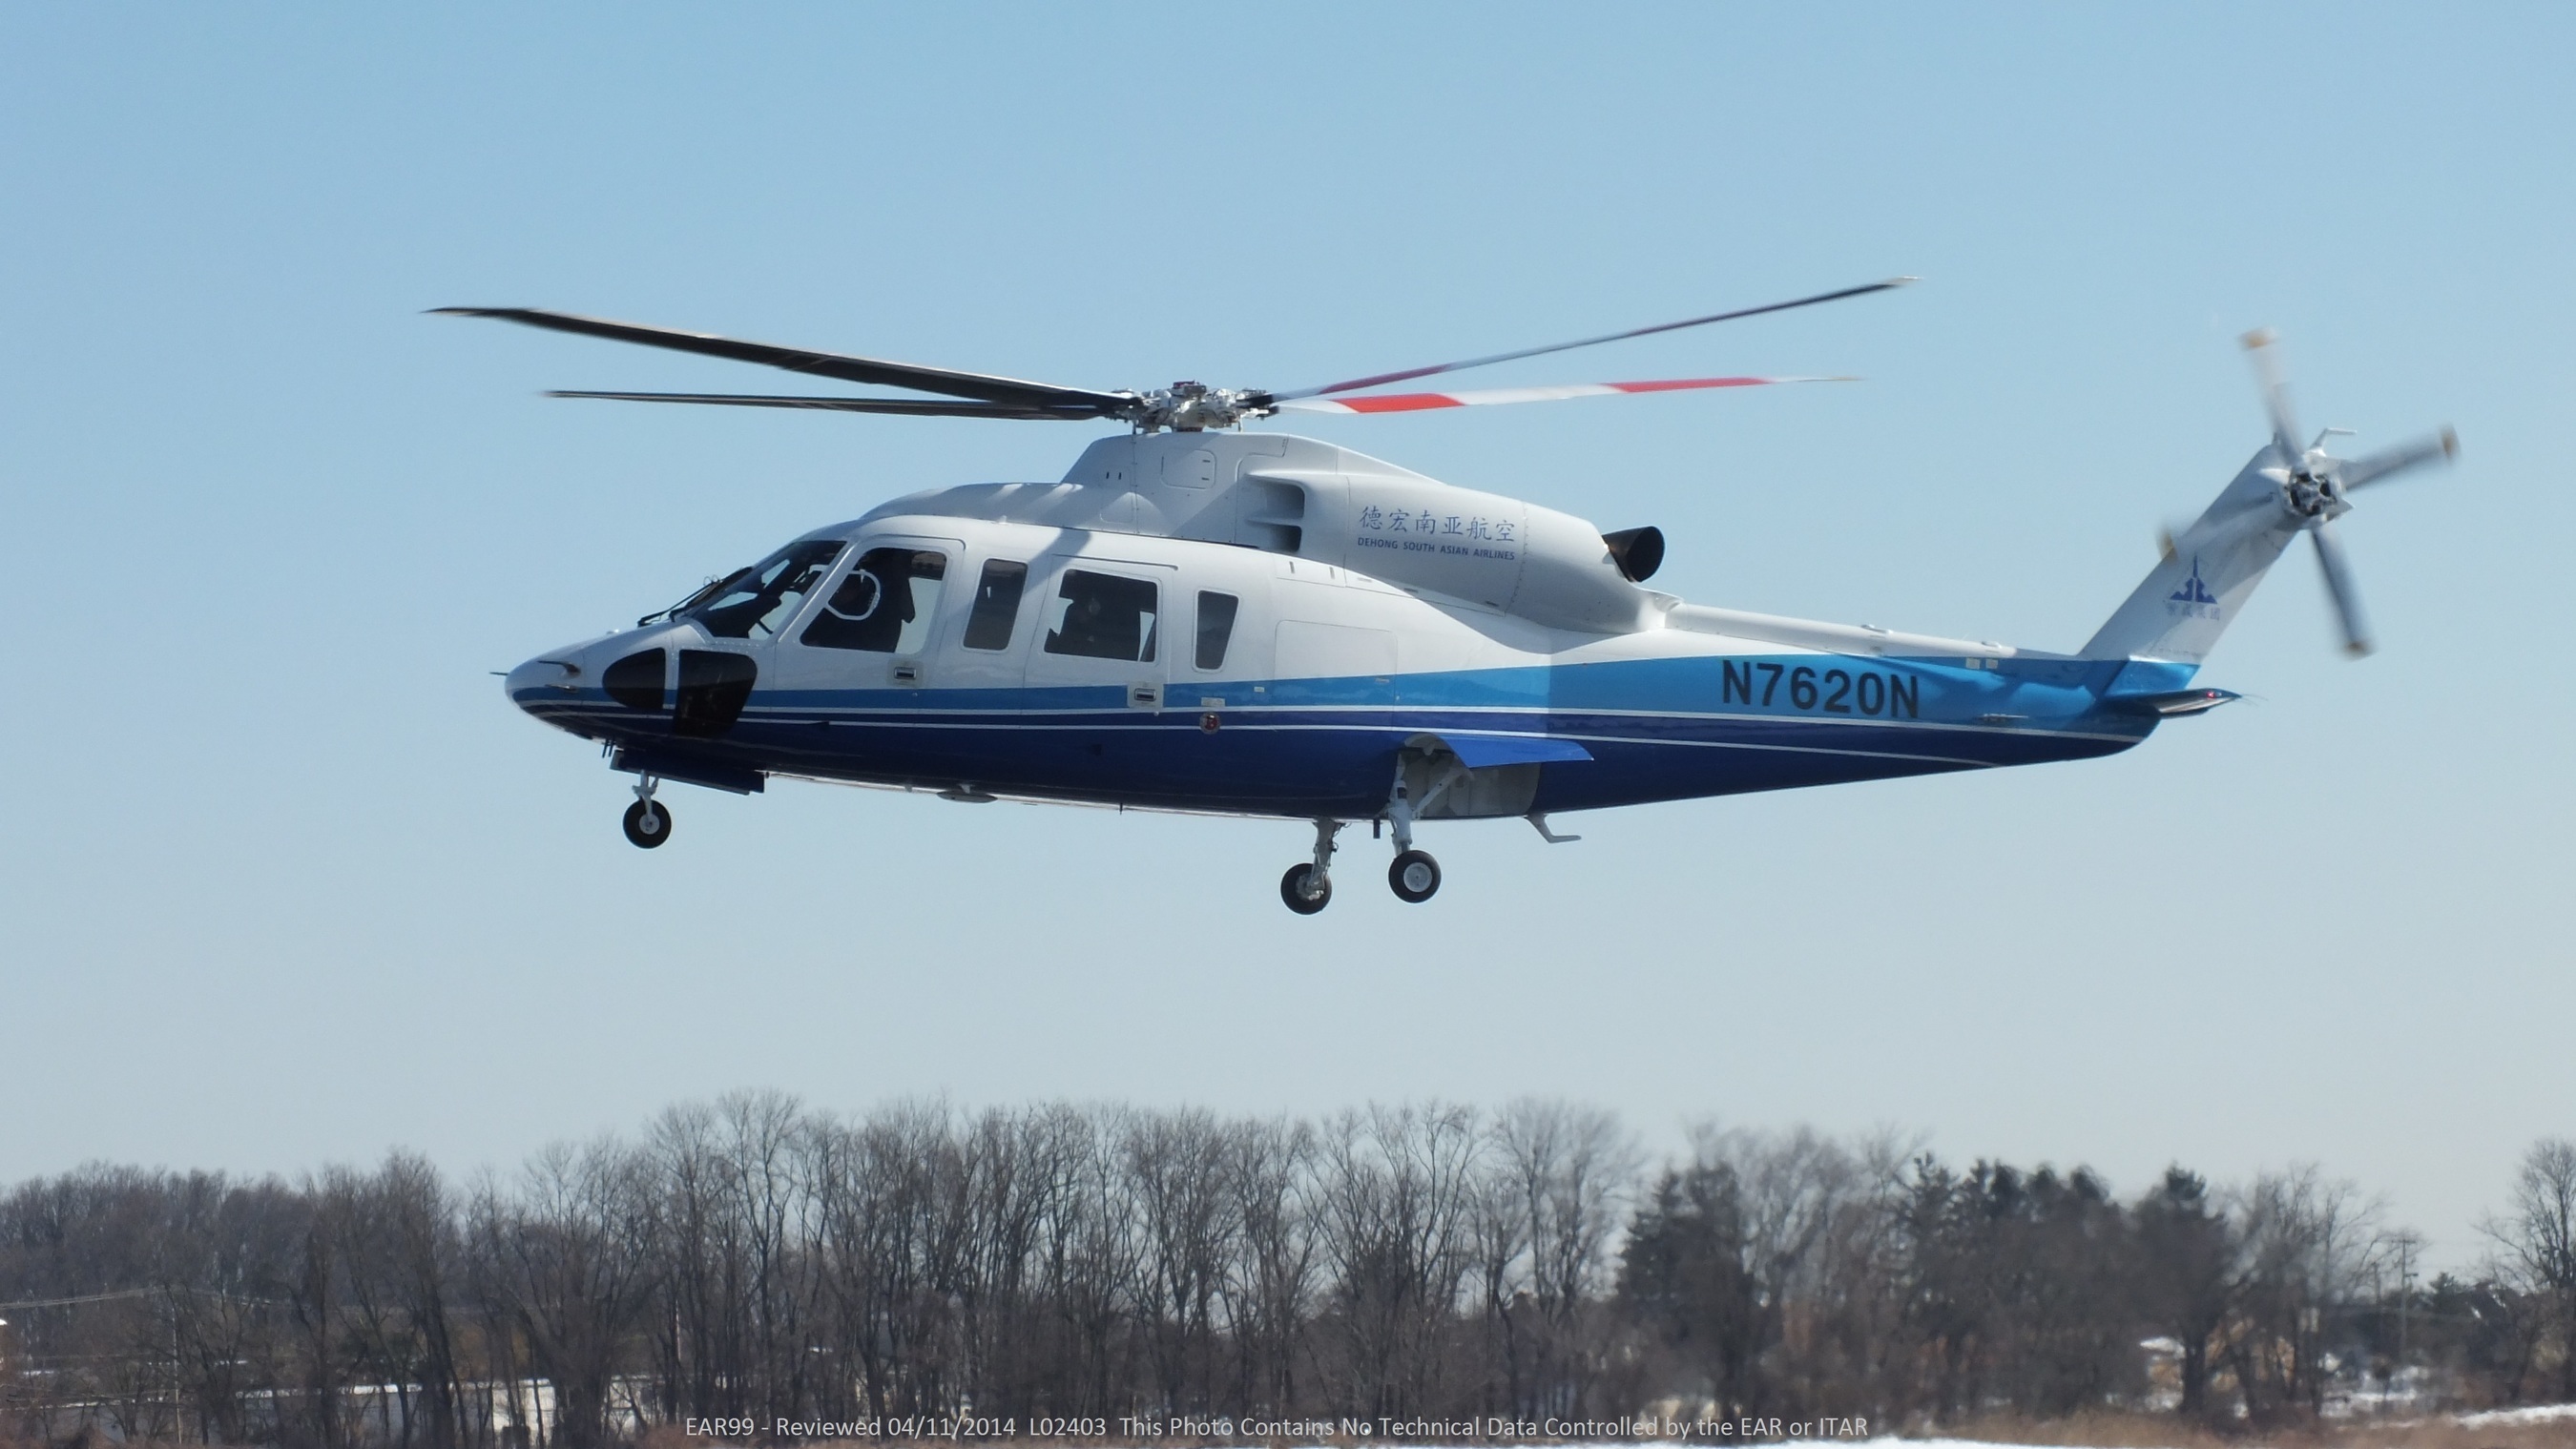 Following the recent certification by the Civil Aviation Administration of China, Yunnan Jingcheng Group will receive the first Sikorsky S-76D™ in China. (PRNewsFoto/Sikorsky Aircraft Corporation)